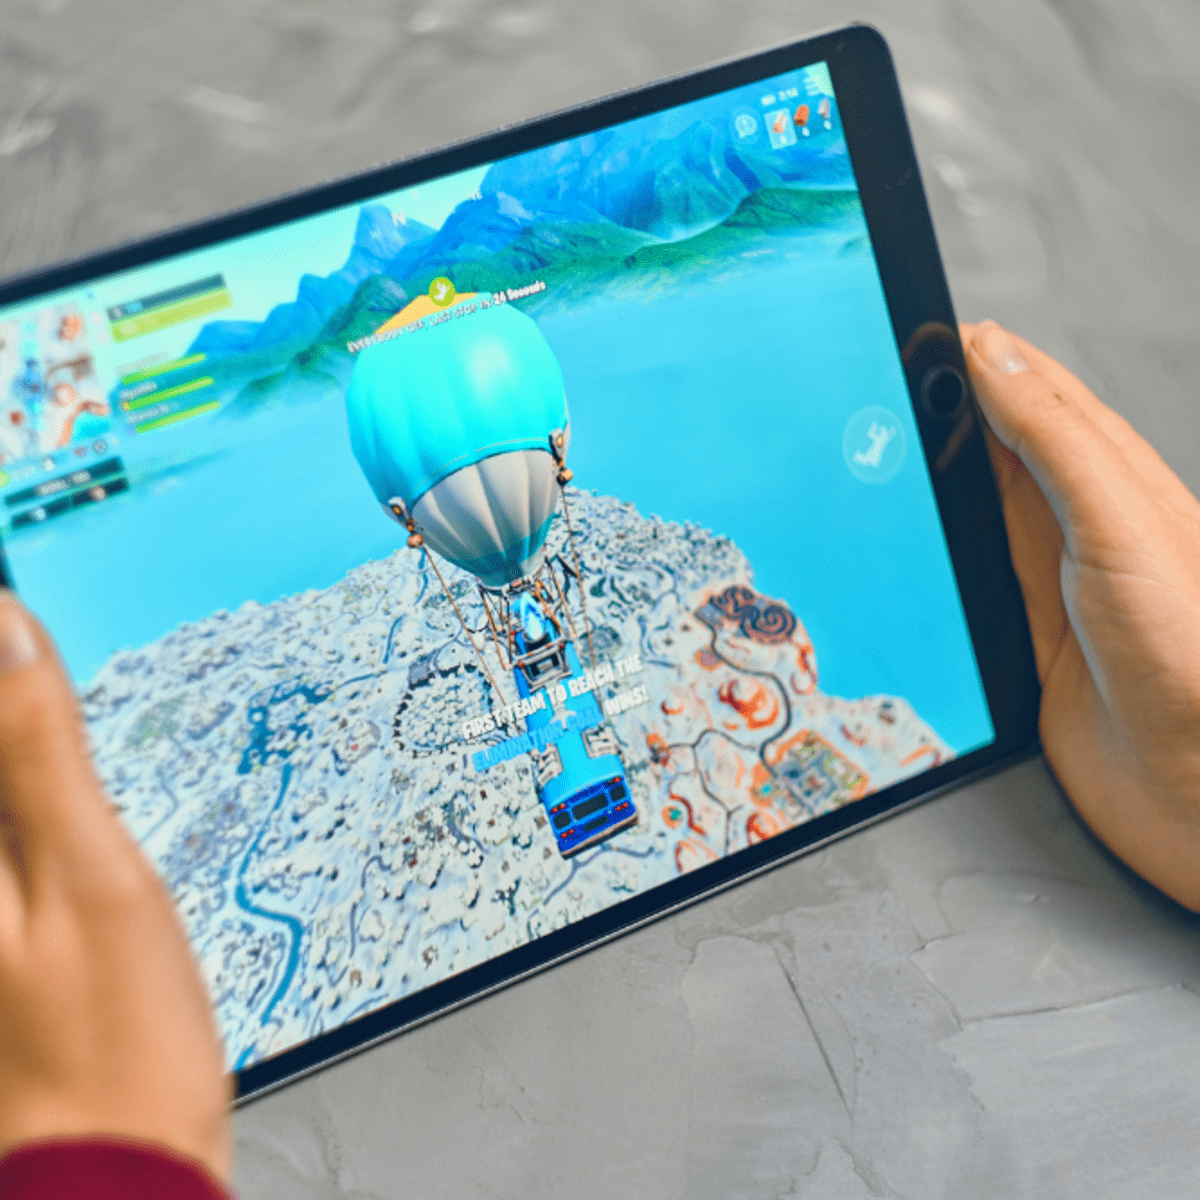 2021 Apple 10.2-Inch iPad Review: The Best Value Tablet Yet ...